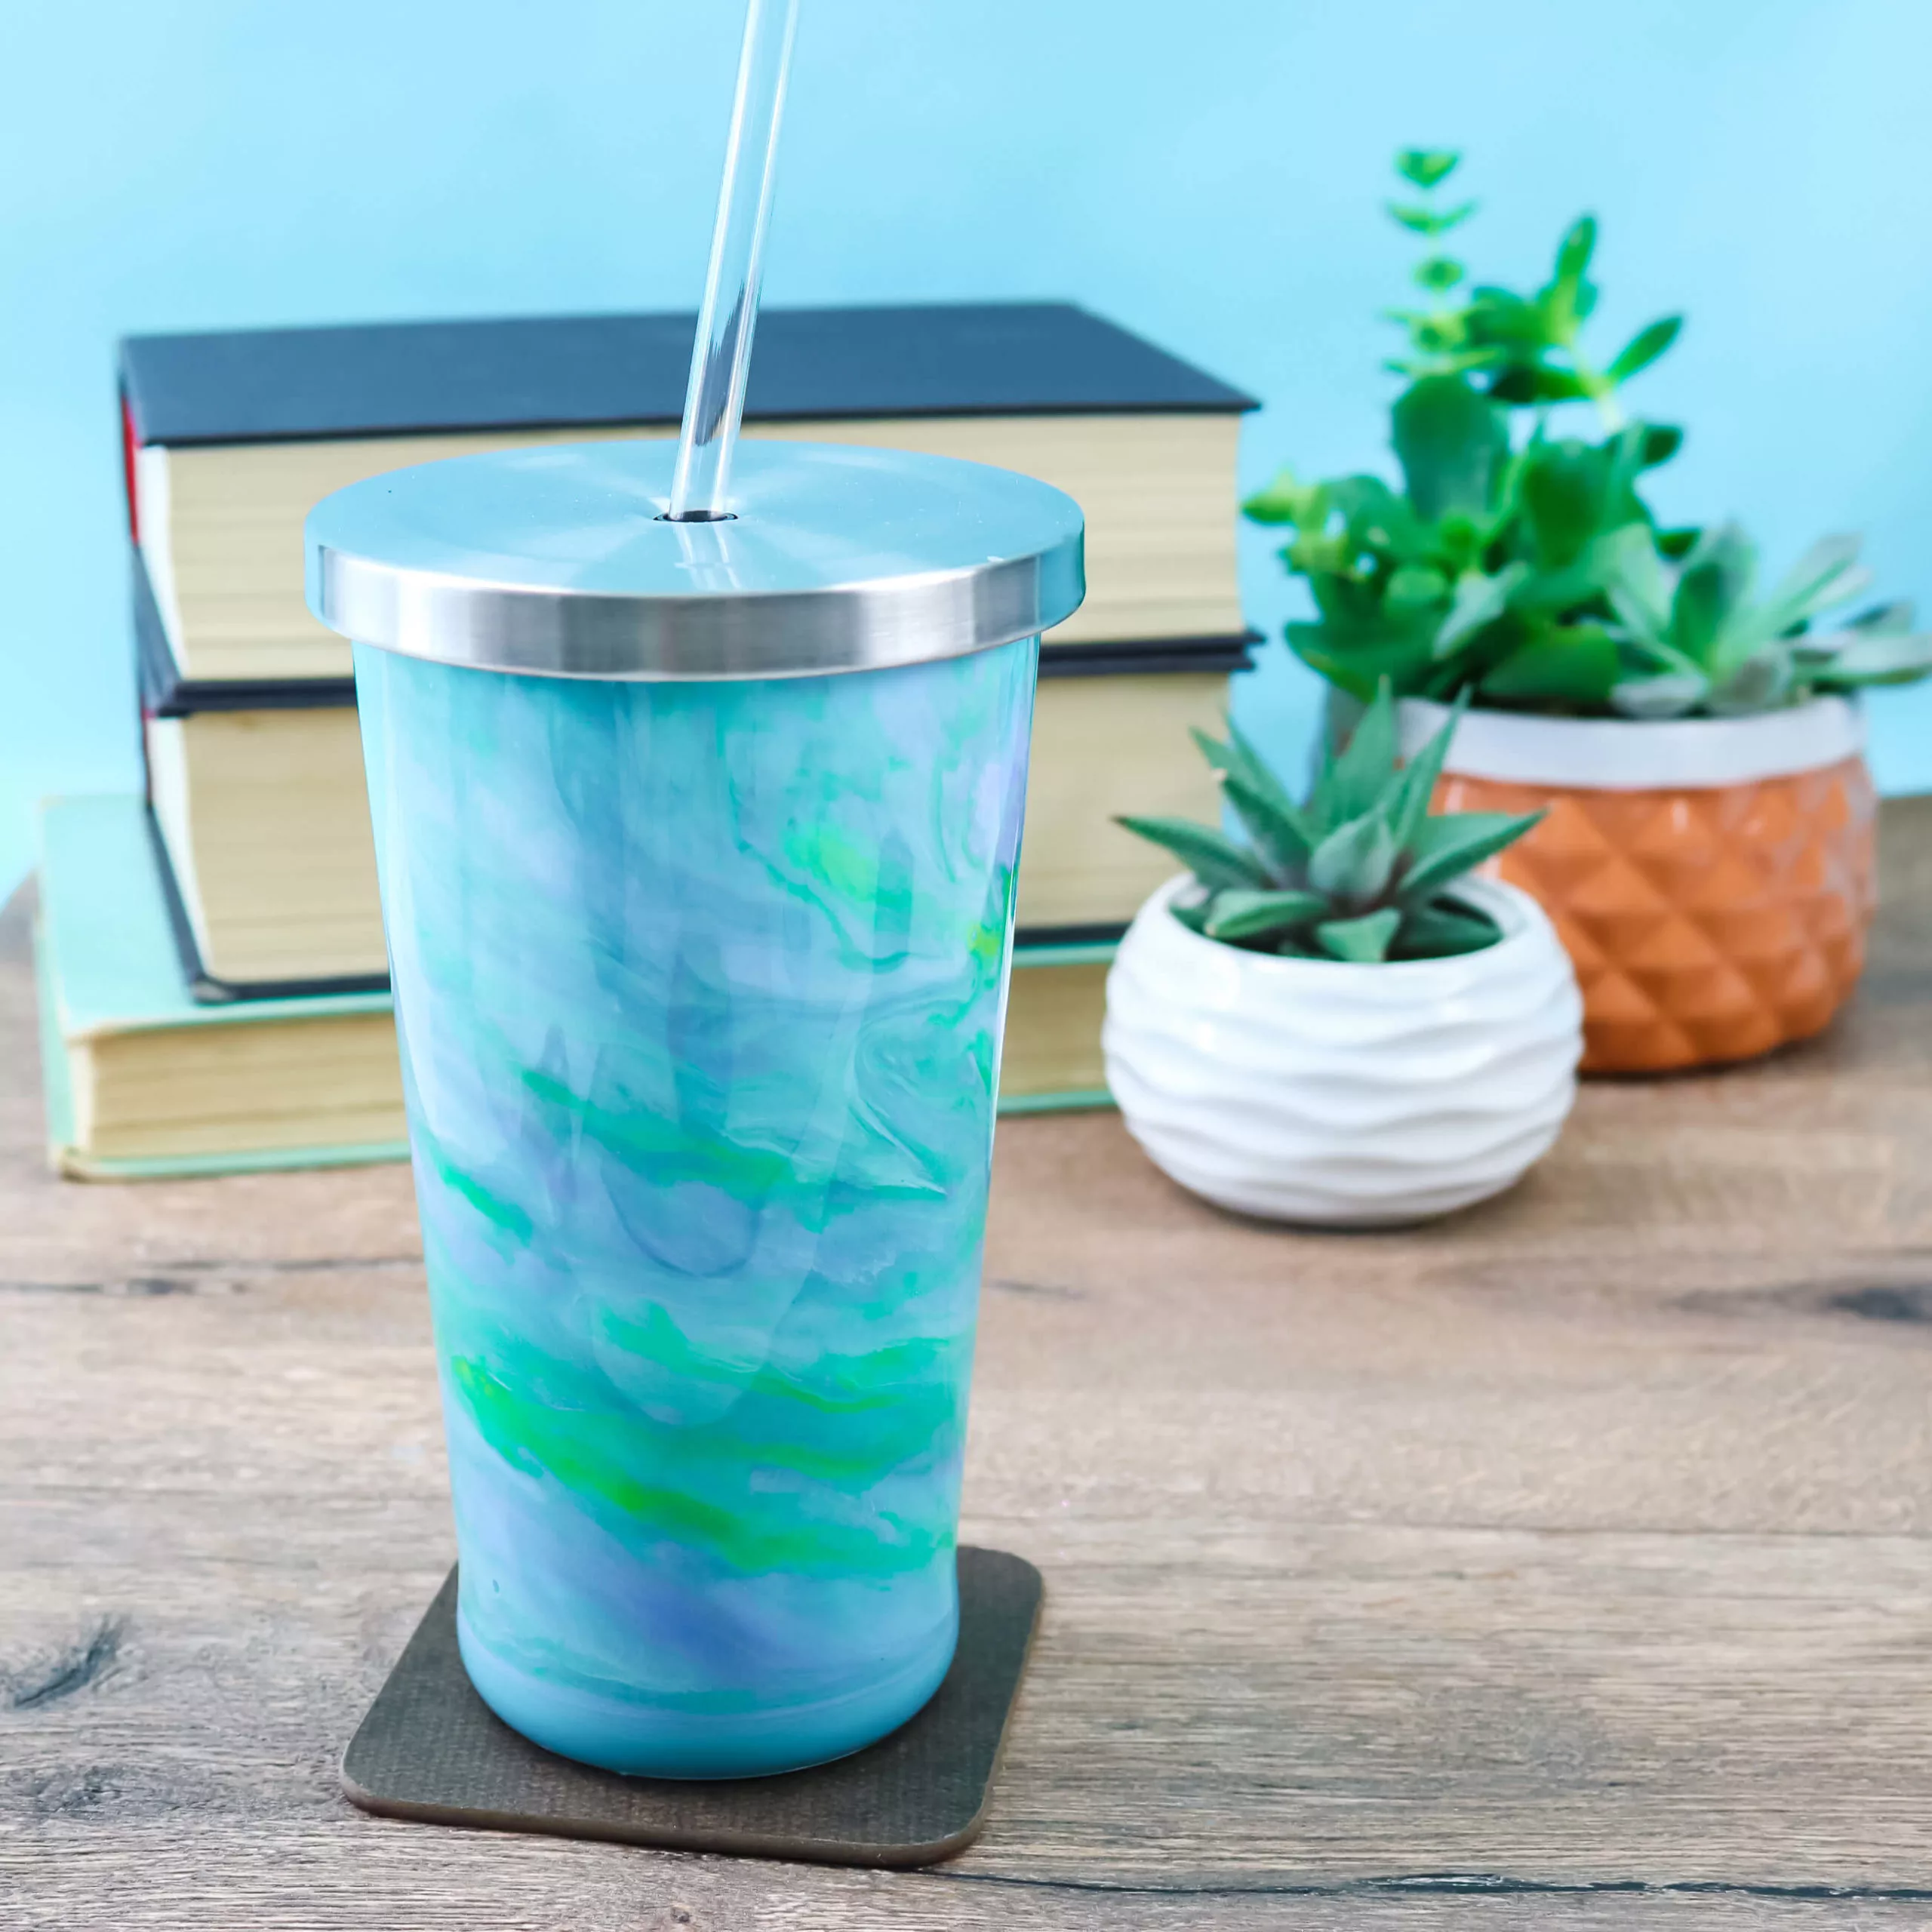 How to Make An Epoxy Tumbler - Resin Obsession